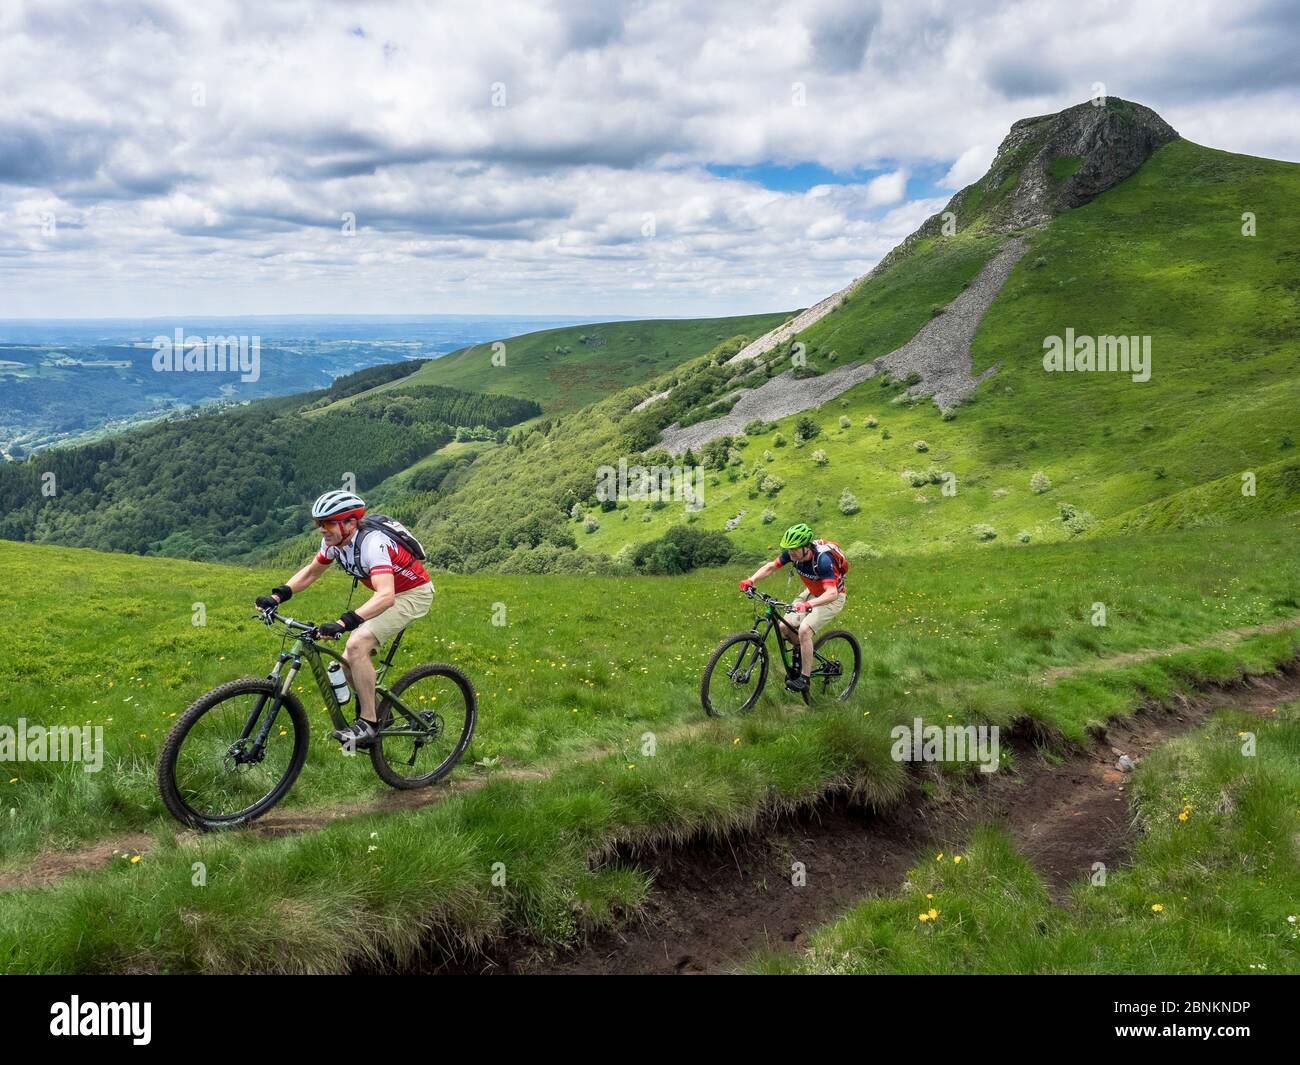 Single trail with mountain bikers on the descent from the mountain 'La banne d'ordanche', a volcanic peak (1 512 m) in the Monts Dore in the French 'Département de Puy-de-Dôme'. Stock Photo